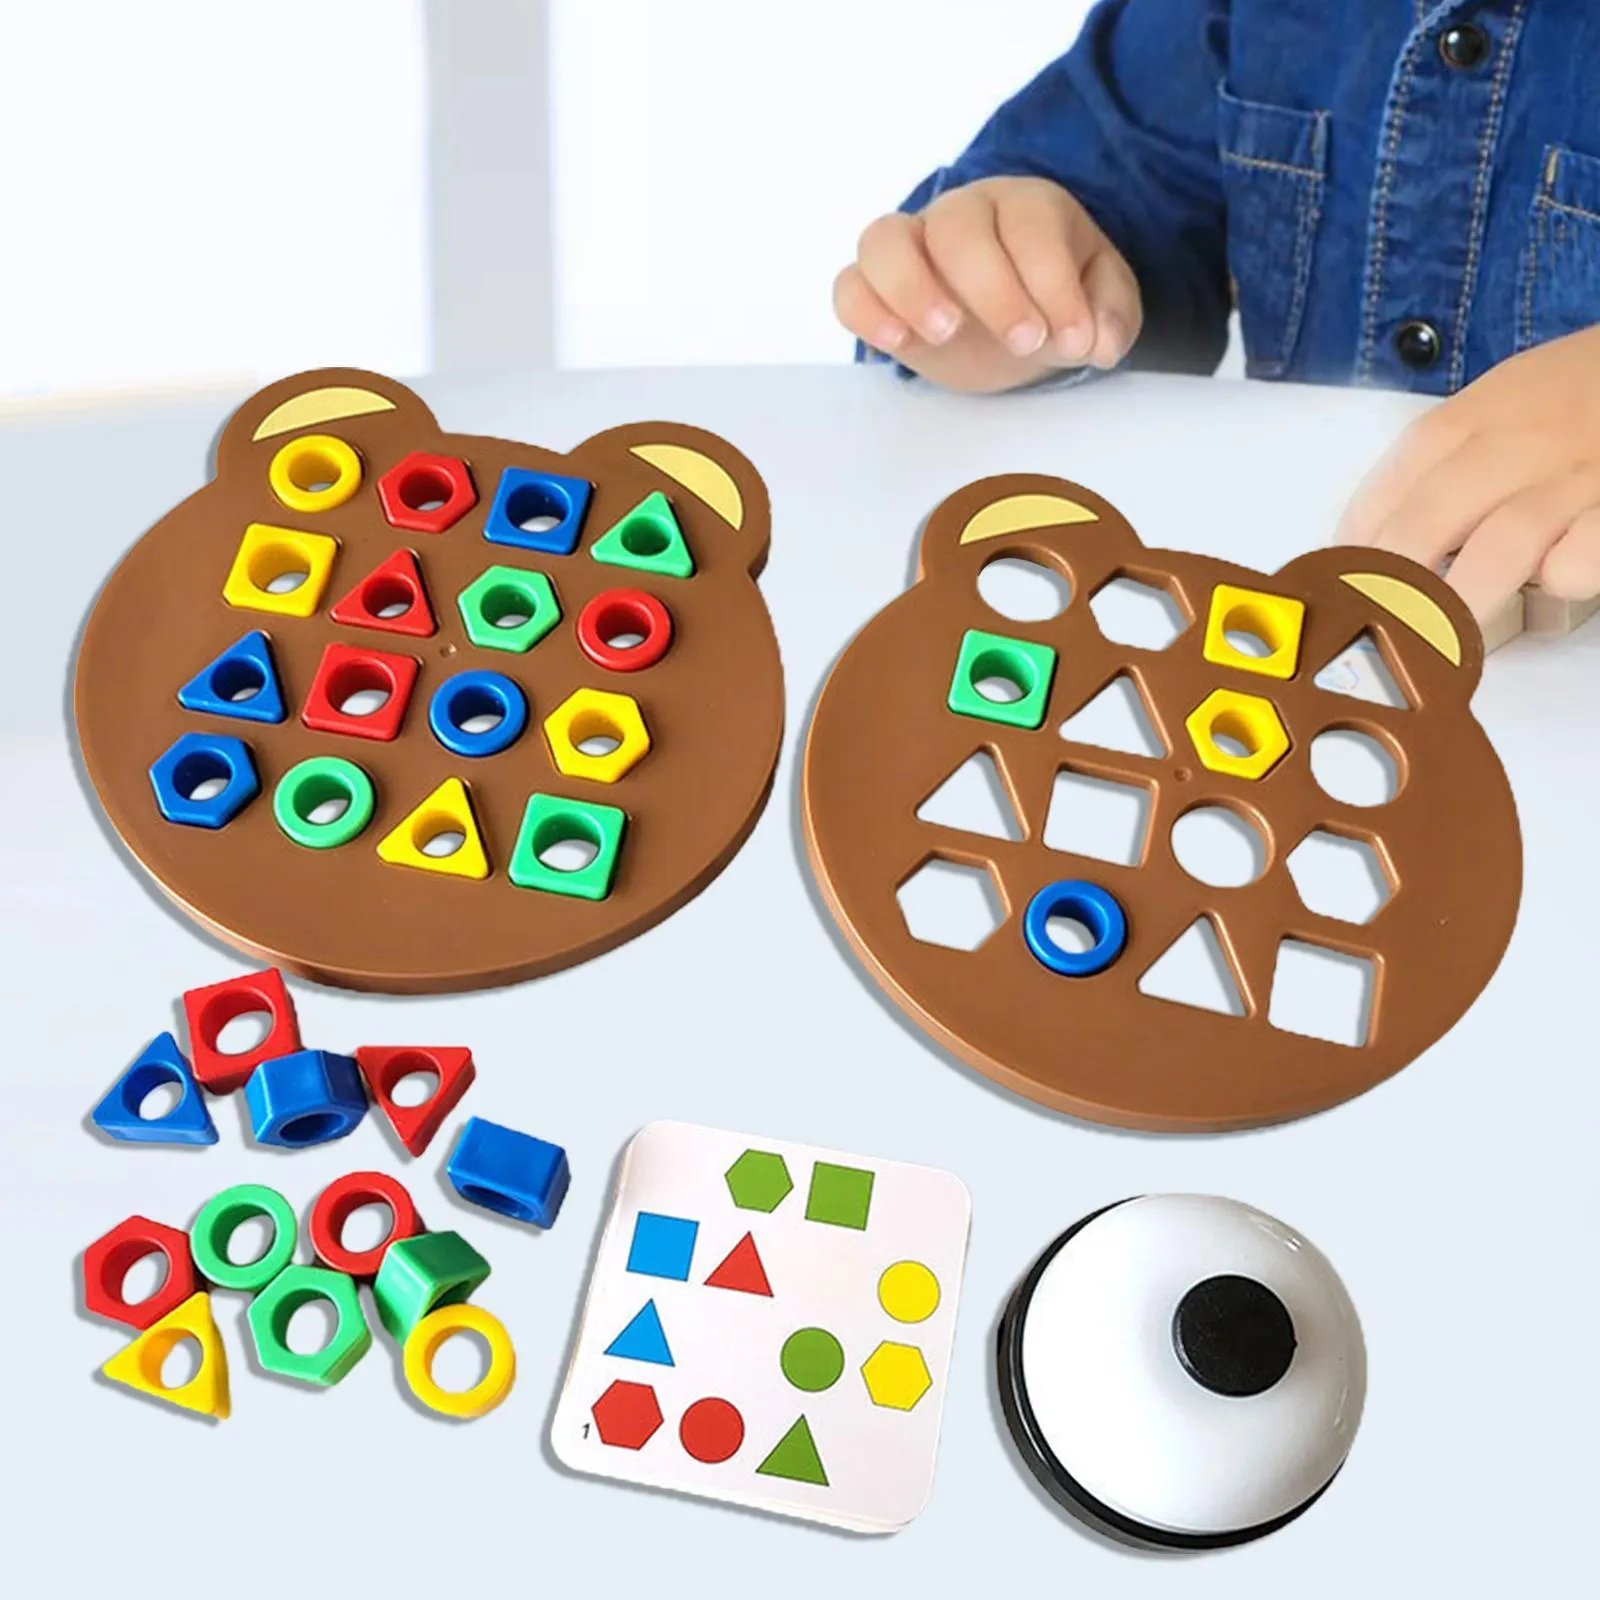 Shape Matching Game Color Sensory Educational Toy for Toddlers Boy Birthday Gift - Picture 8 of 10